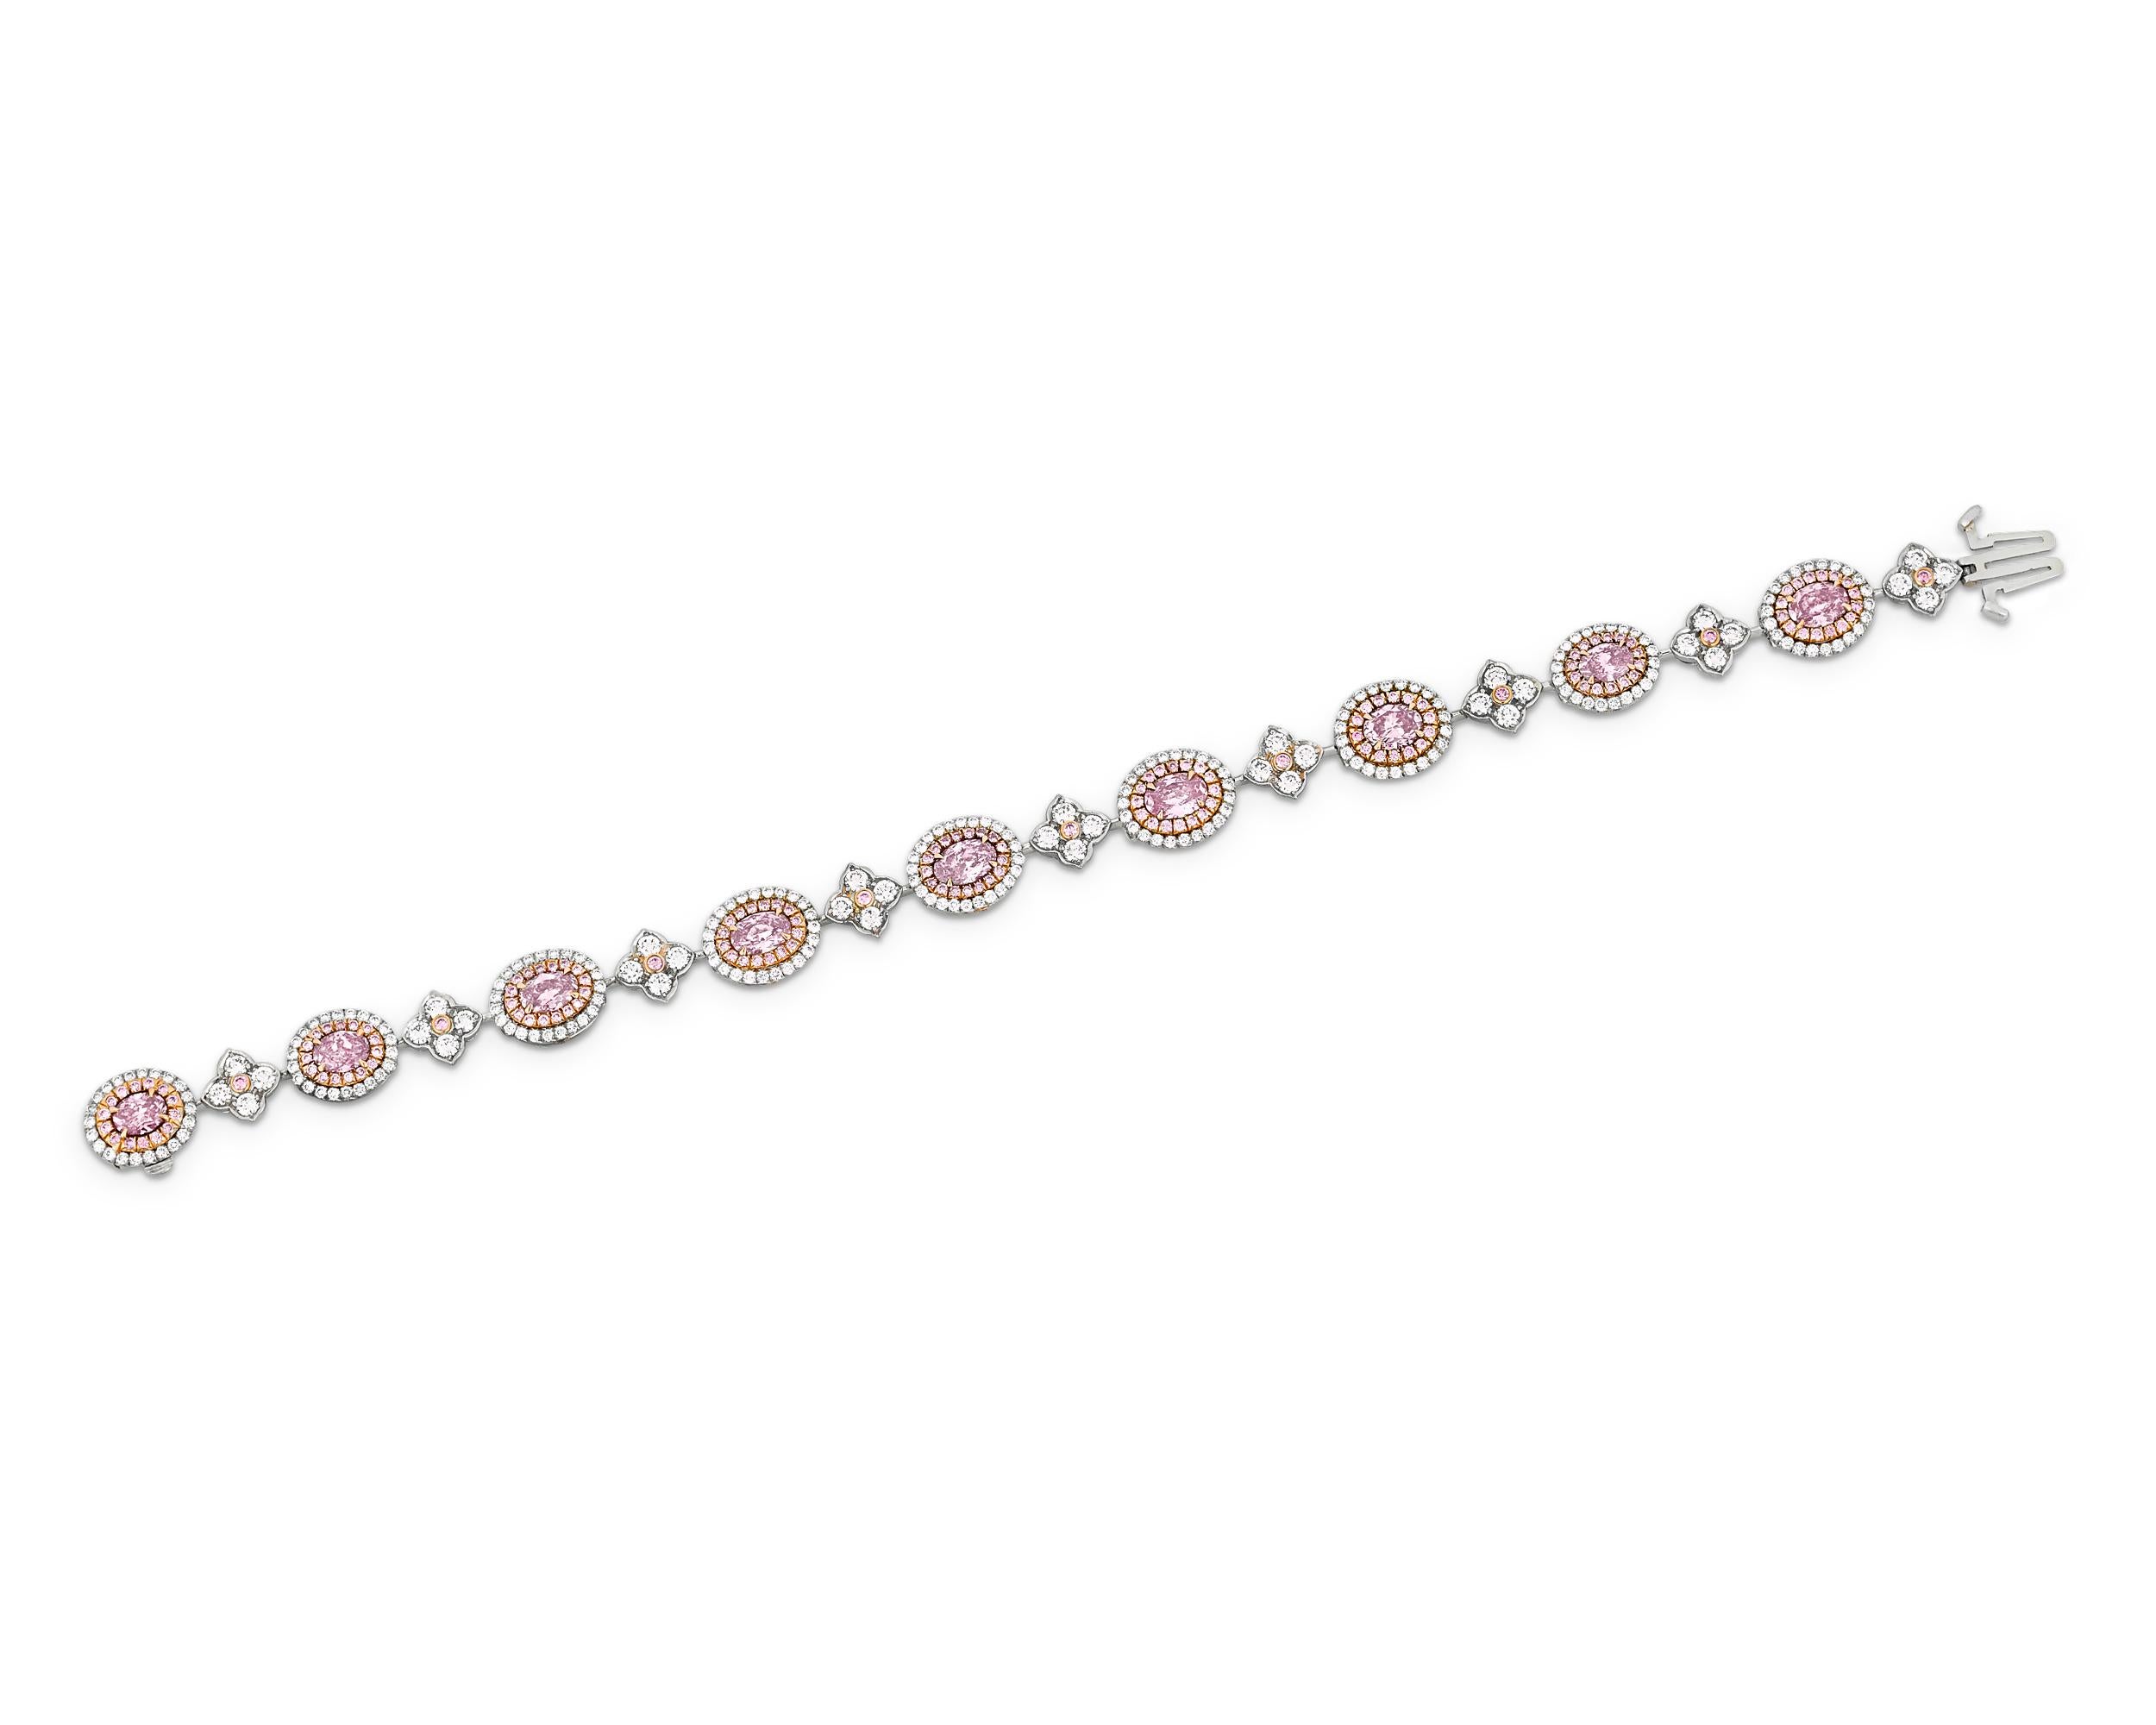 A dazzling array of pink and white diamonds shine with amazing intensity in this bracelet. Nine oval-shaped fancy intense colored diamonds ranging in color from pink to purple-pink and weighing 2.73 total carats dot the length of the bracelet while